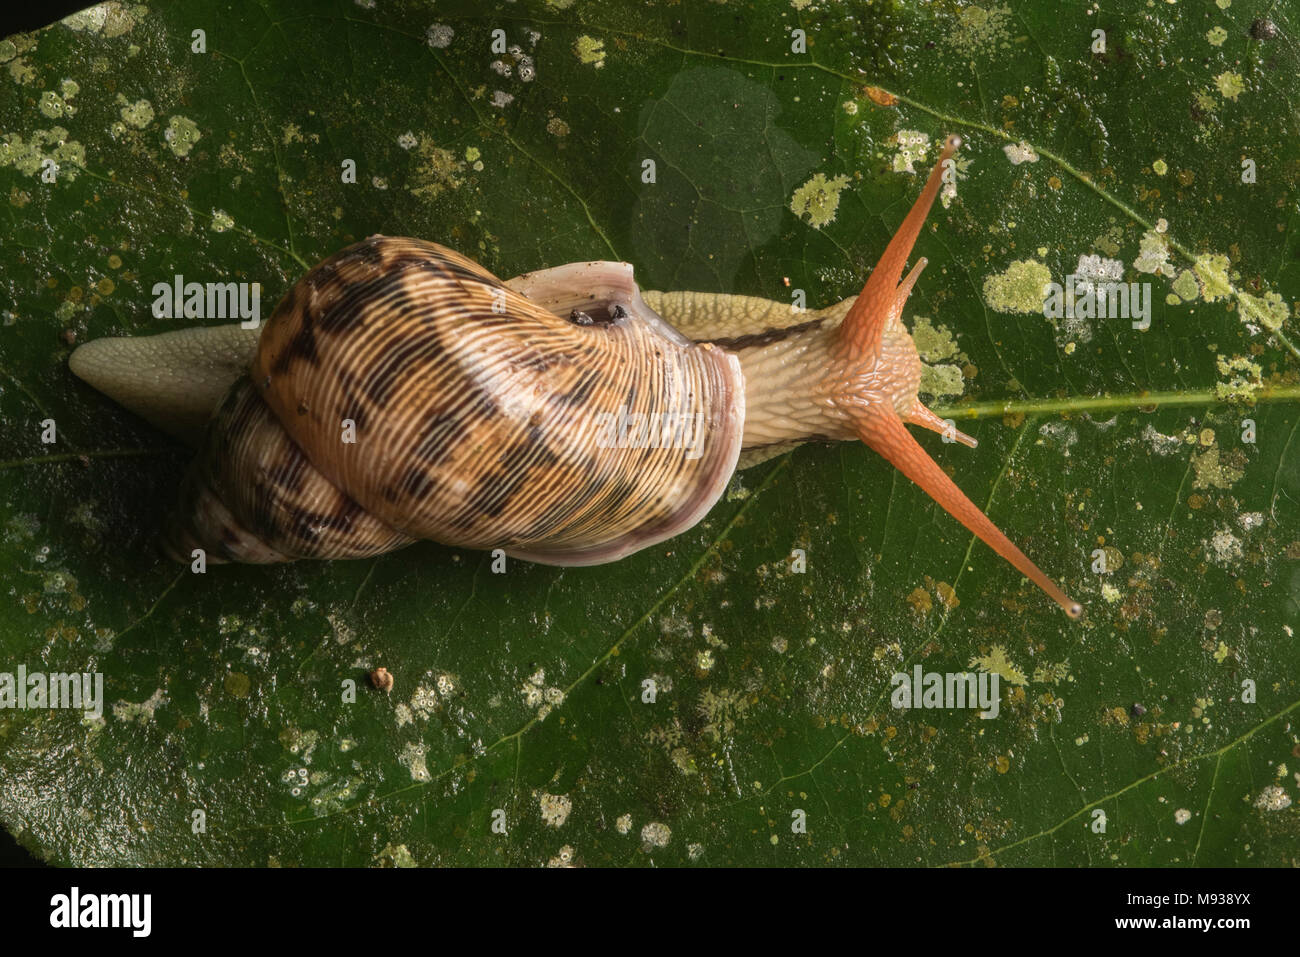 A macro photo of a tropical forest snail from the Peruvian rainforest. Stock Photo